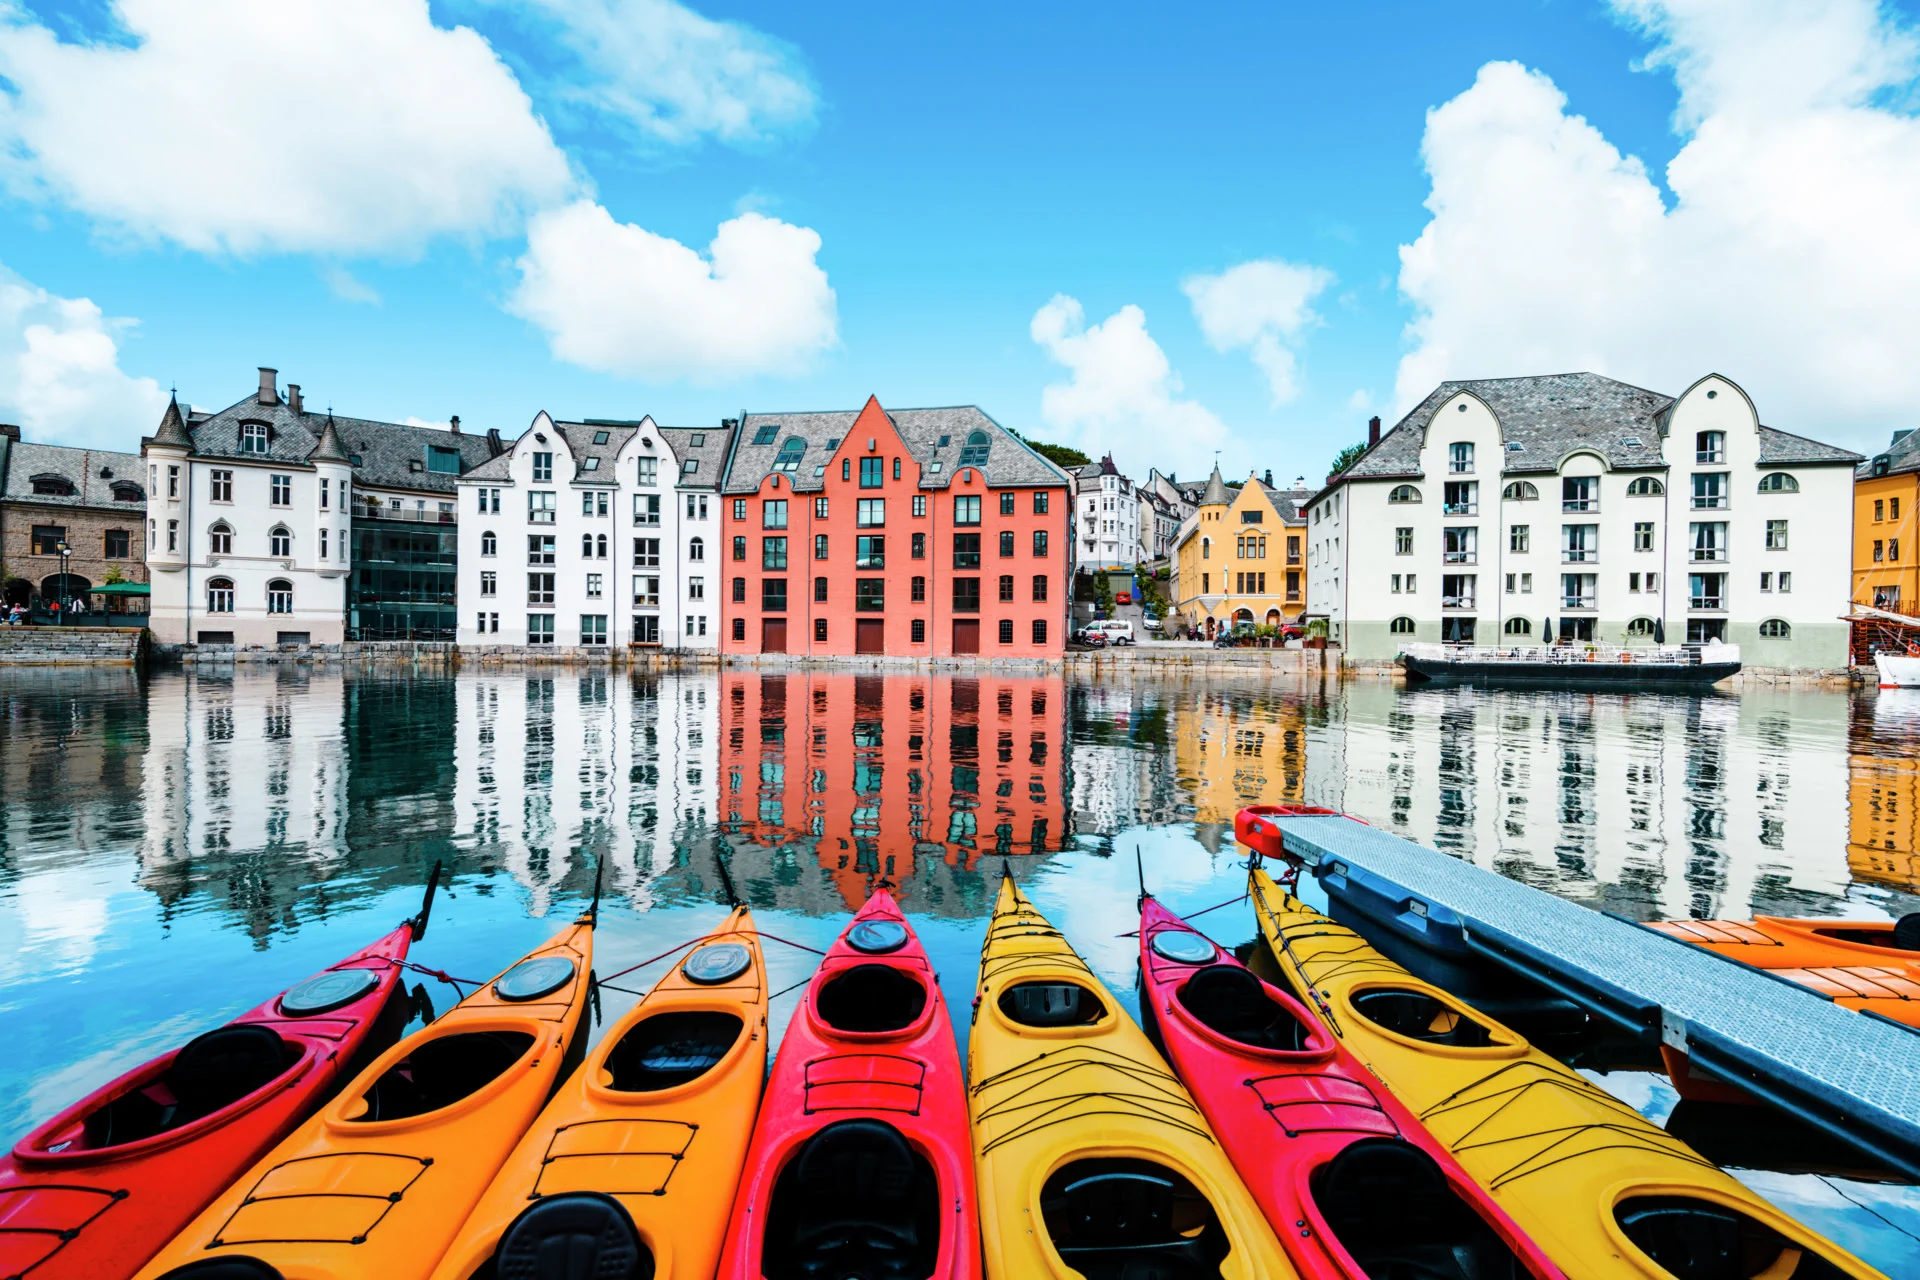 Kayaks on the canal in front of a row of coloured houses in Ålesund